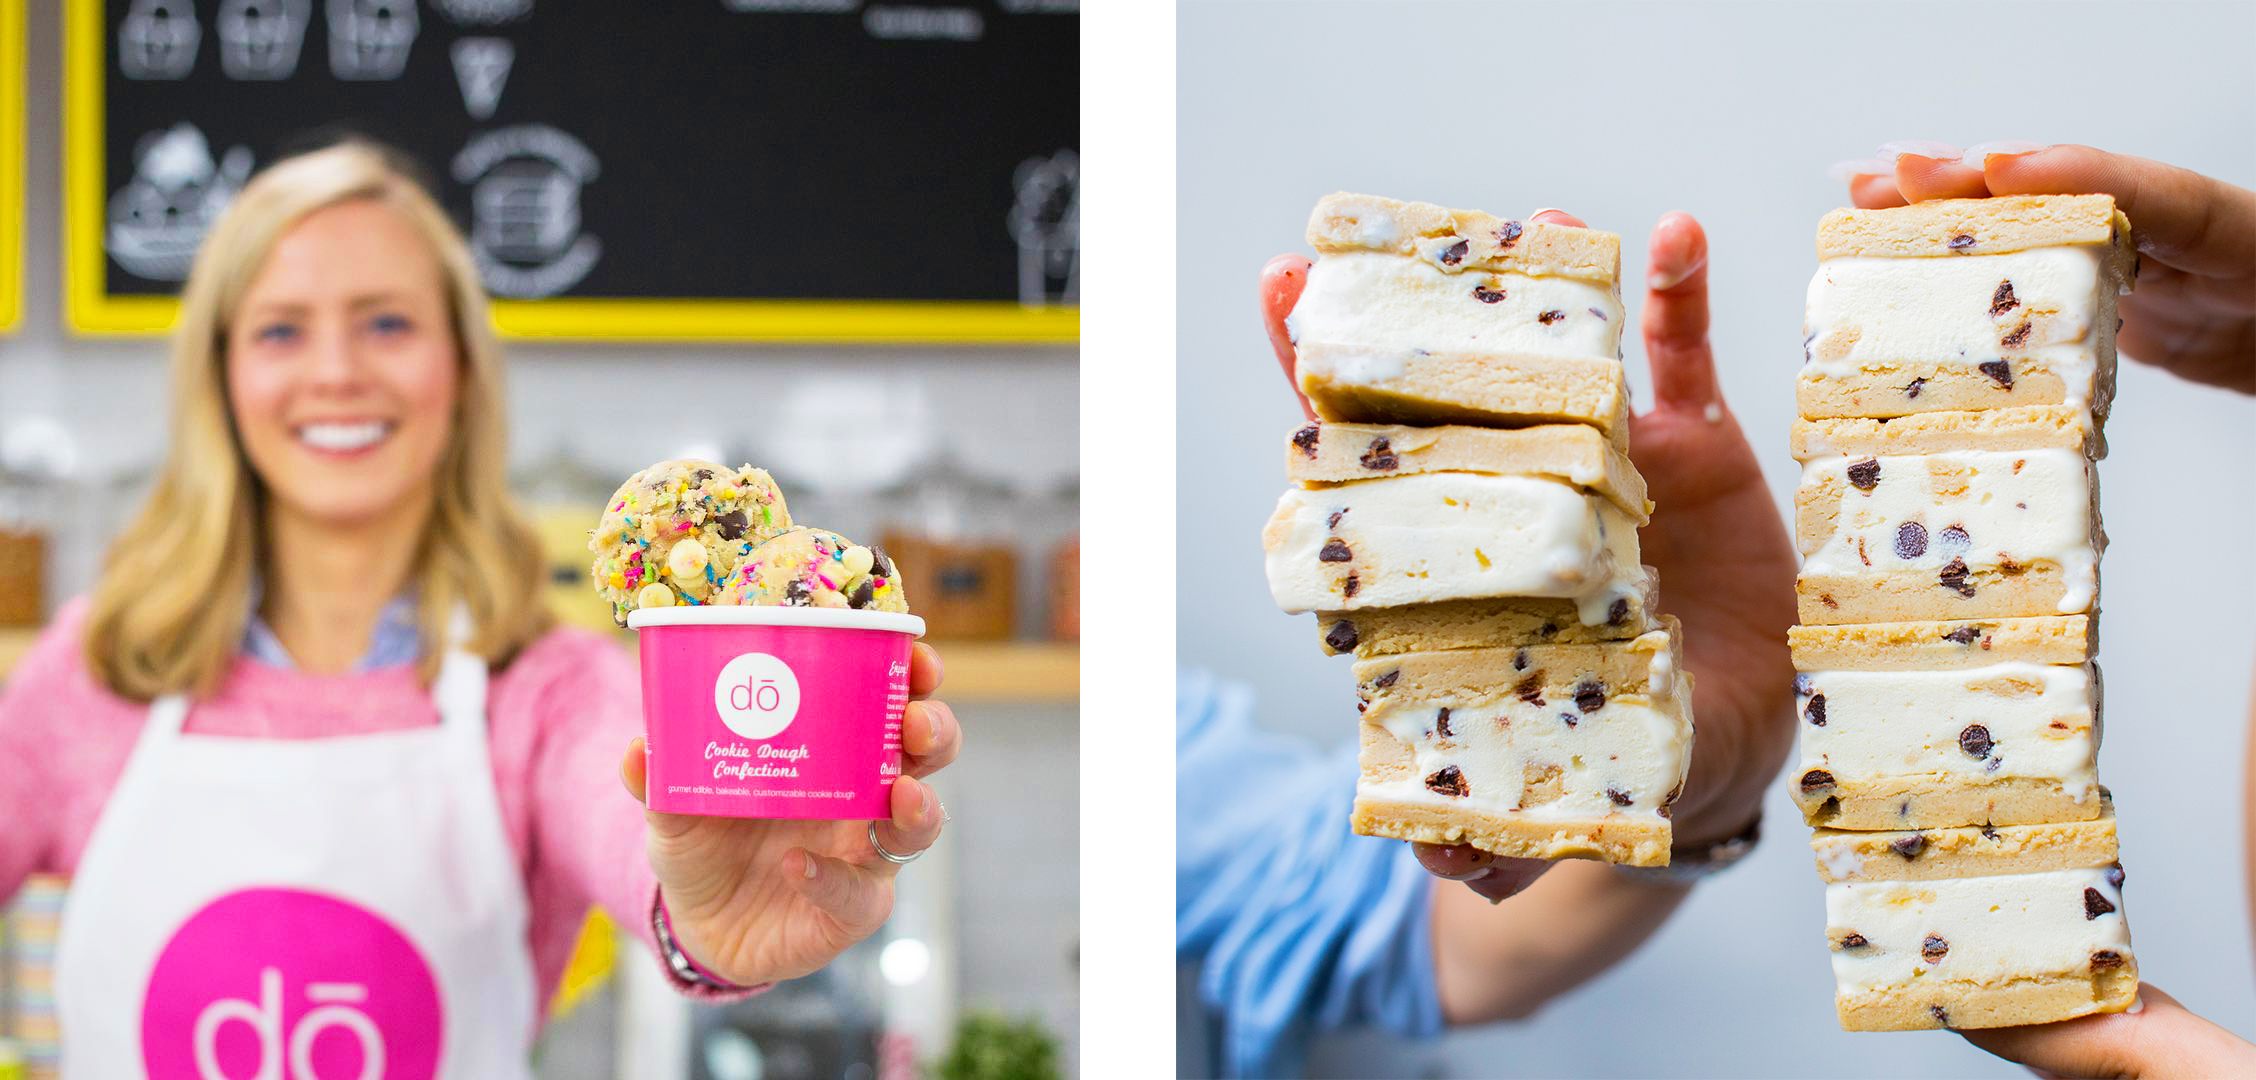 DŌ, Cookie Dough Confections will be featured at the second annual ice cream we love festival held at bal harbour shops